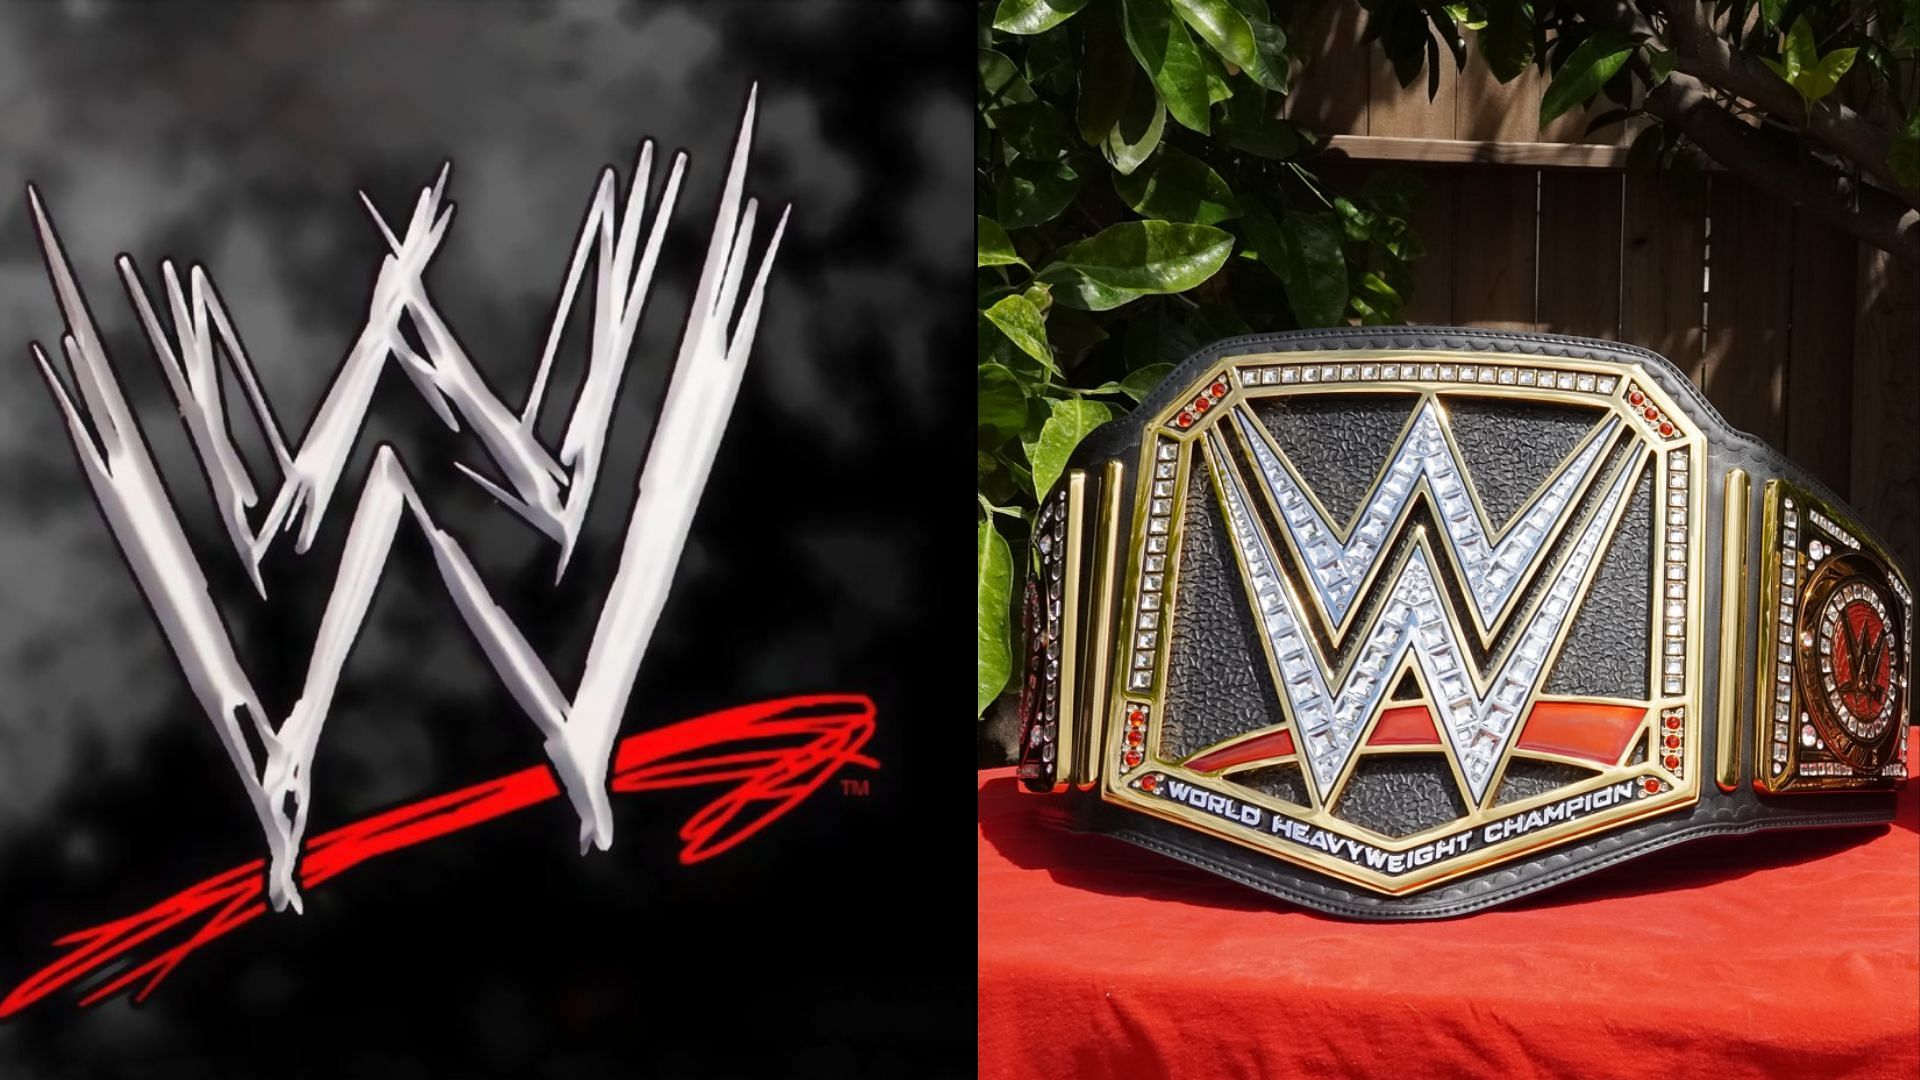 The history of the WWE title is fraught with controversial moments